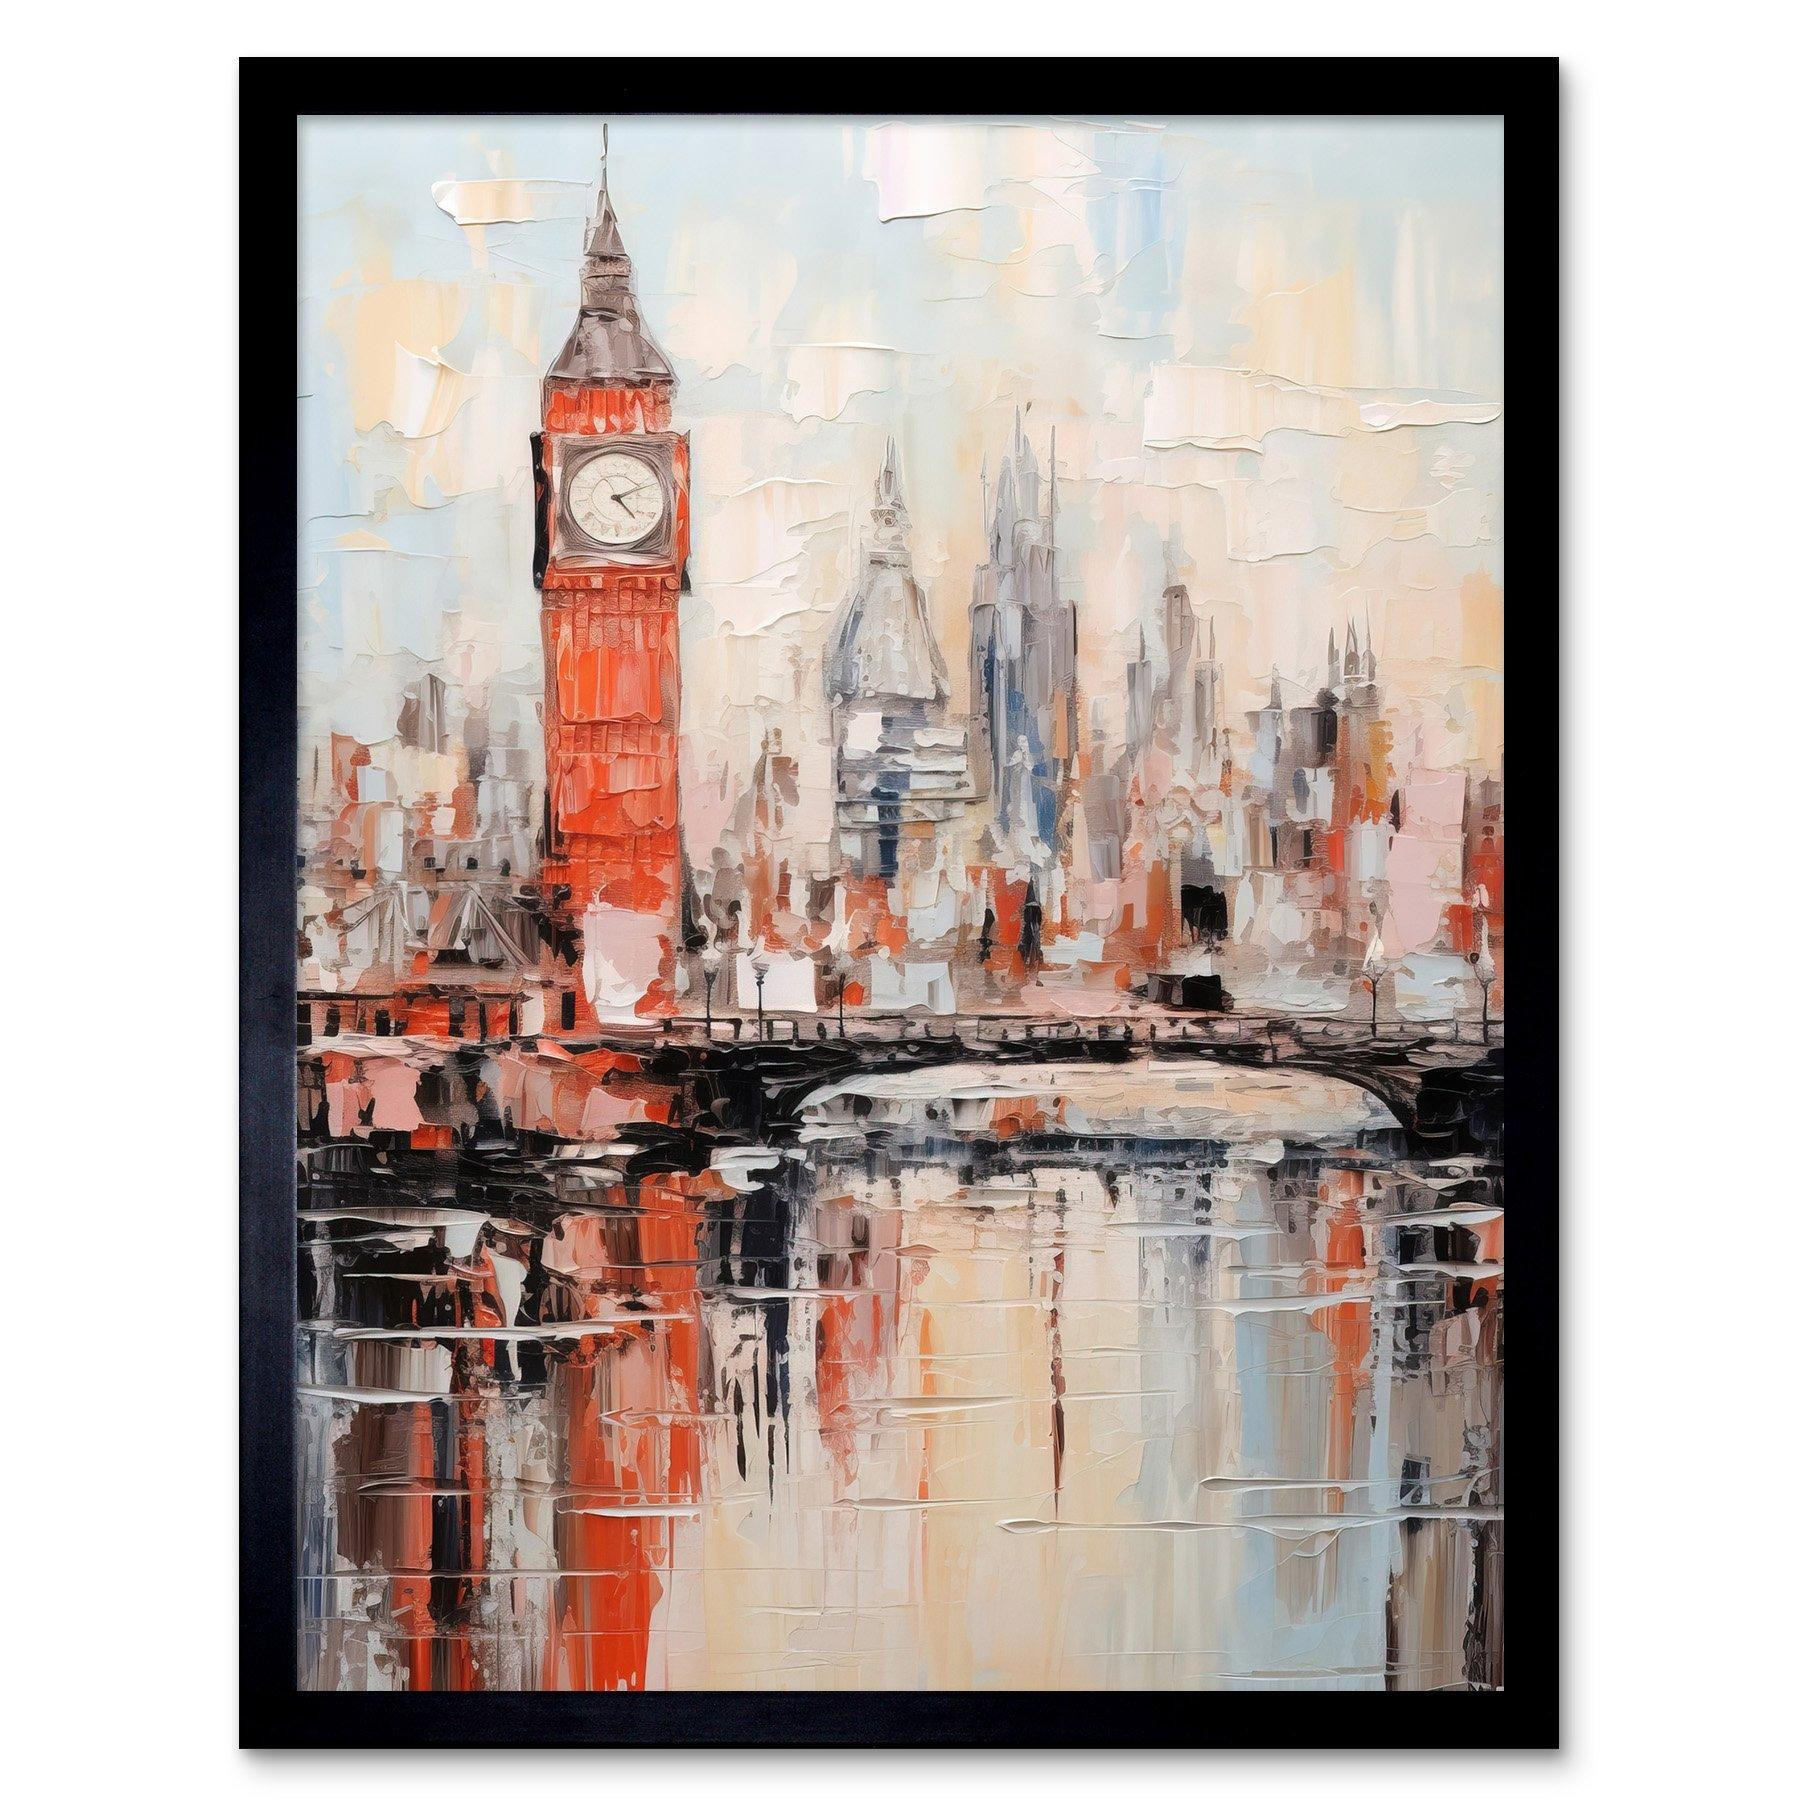 London Skyline Abstract Oil Painting Thick Paint Red Big Ben River Thames Westminster Bridge England City Art Print Framed Poster Wall Decor 12x16 inch - image 1